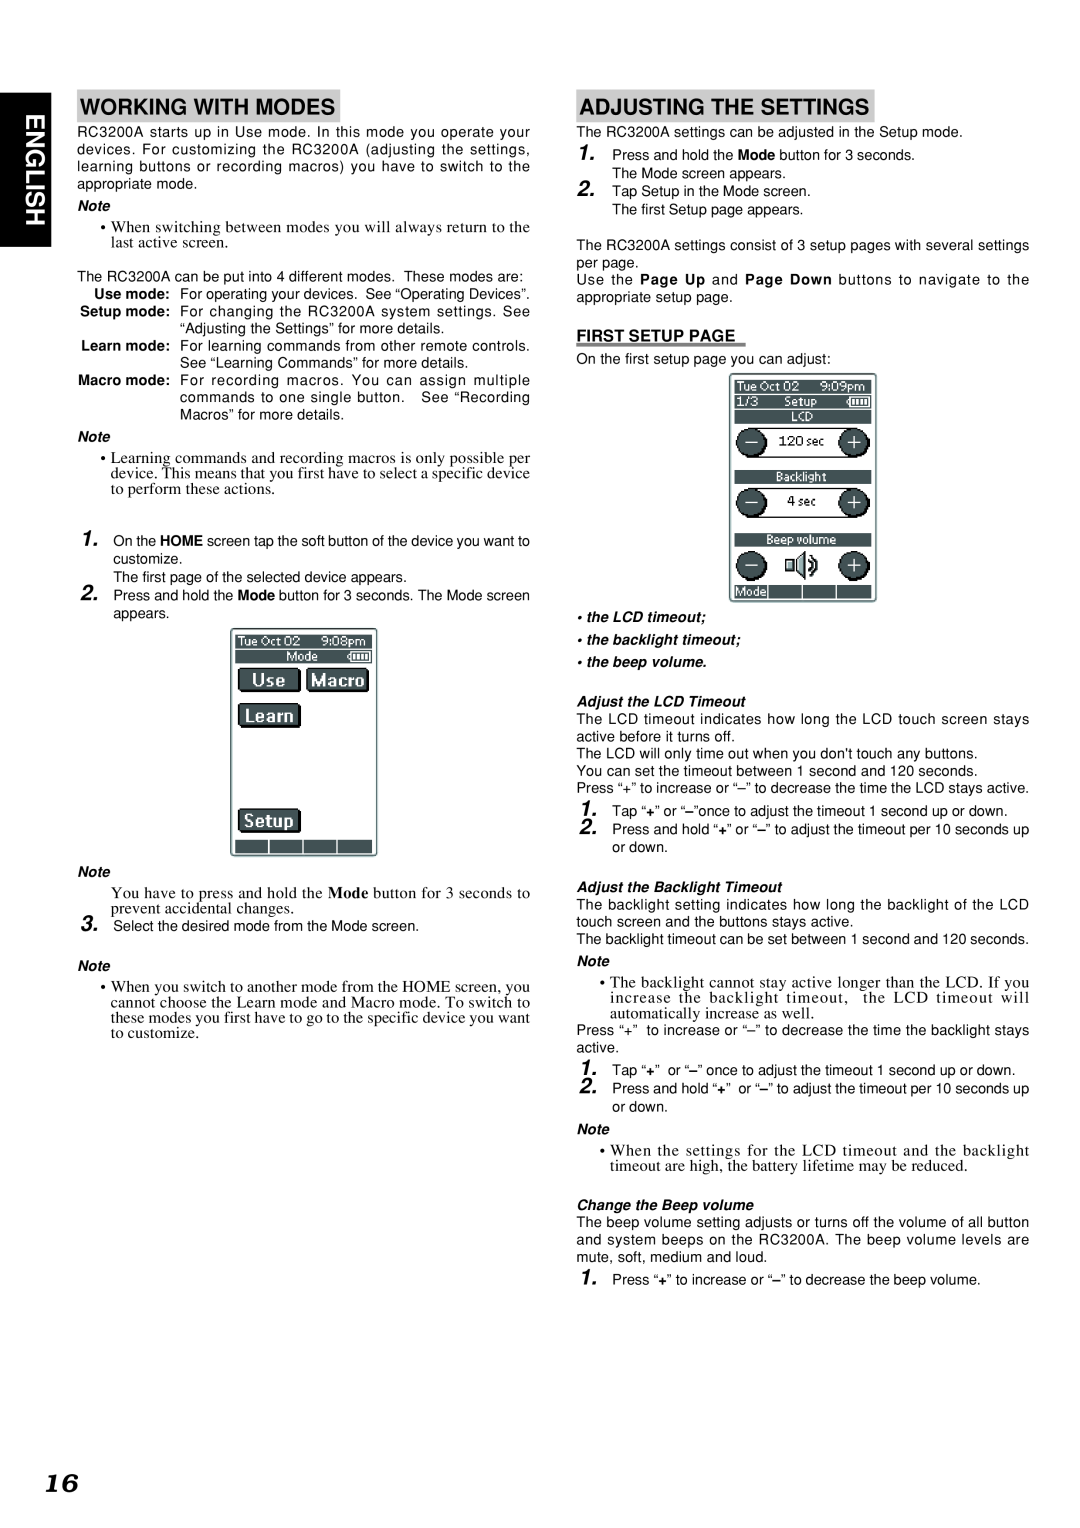 Marantz SR8200 manual English, Working With Modes, Adjusting The Settings, First Setup Page 